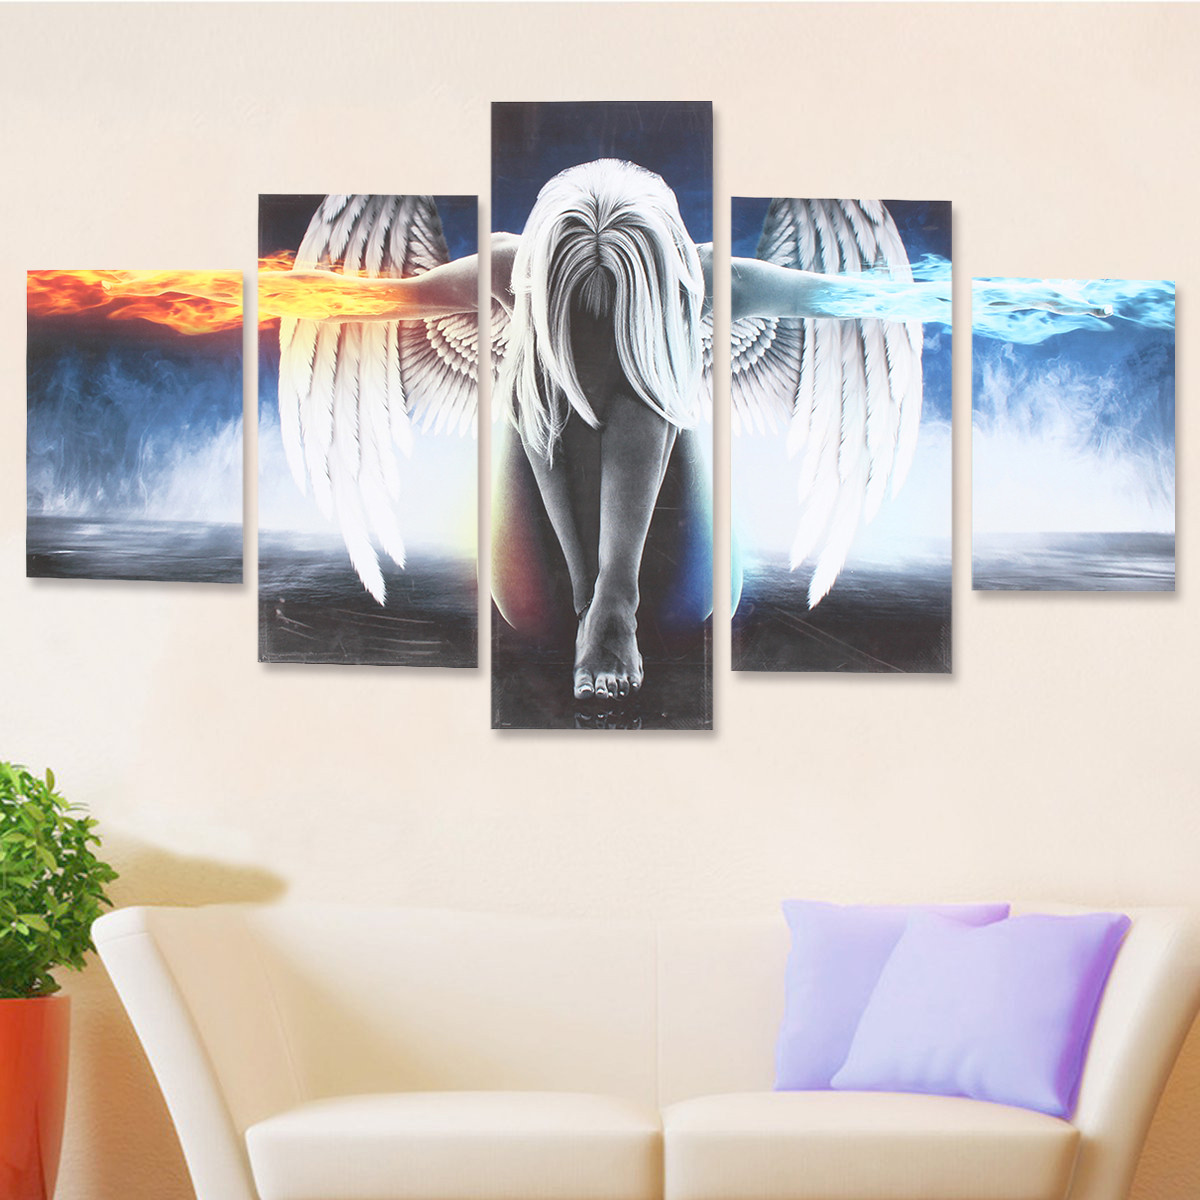 5PCS-Angel-Canvas-Print-Painting-Modern-Art-Wall-Picture-Home-Decor-Decoration-with-Framed-for-Home--1219145-7